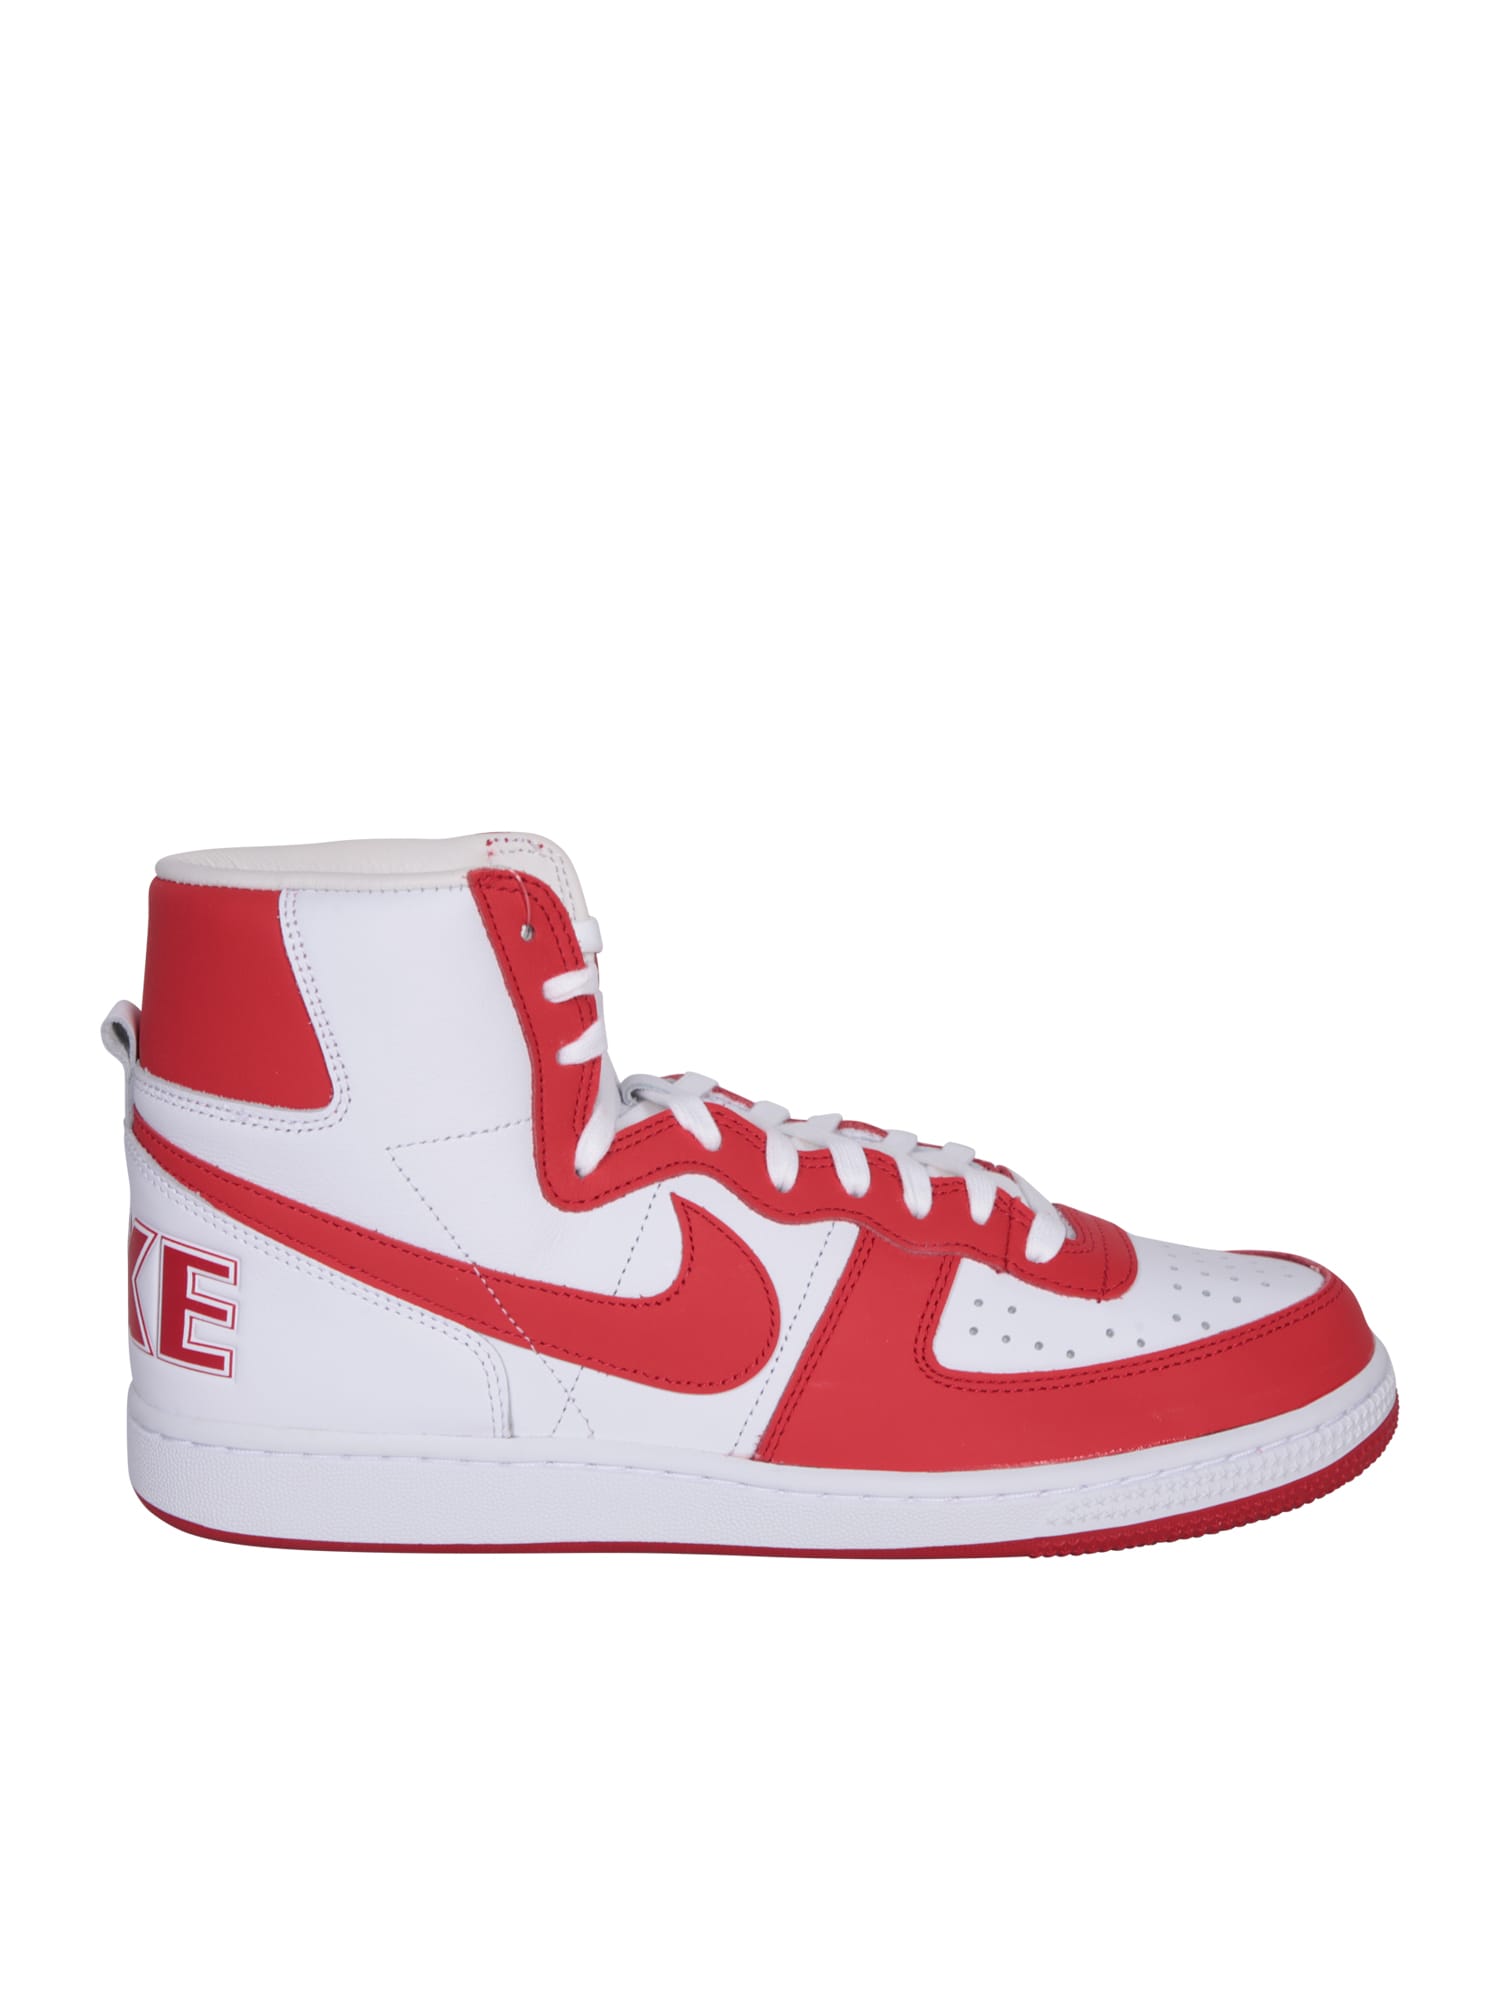 Comme Des Garçons Homme Deux Sneakers High-top Nike Terminator Red/white